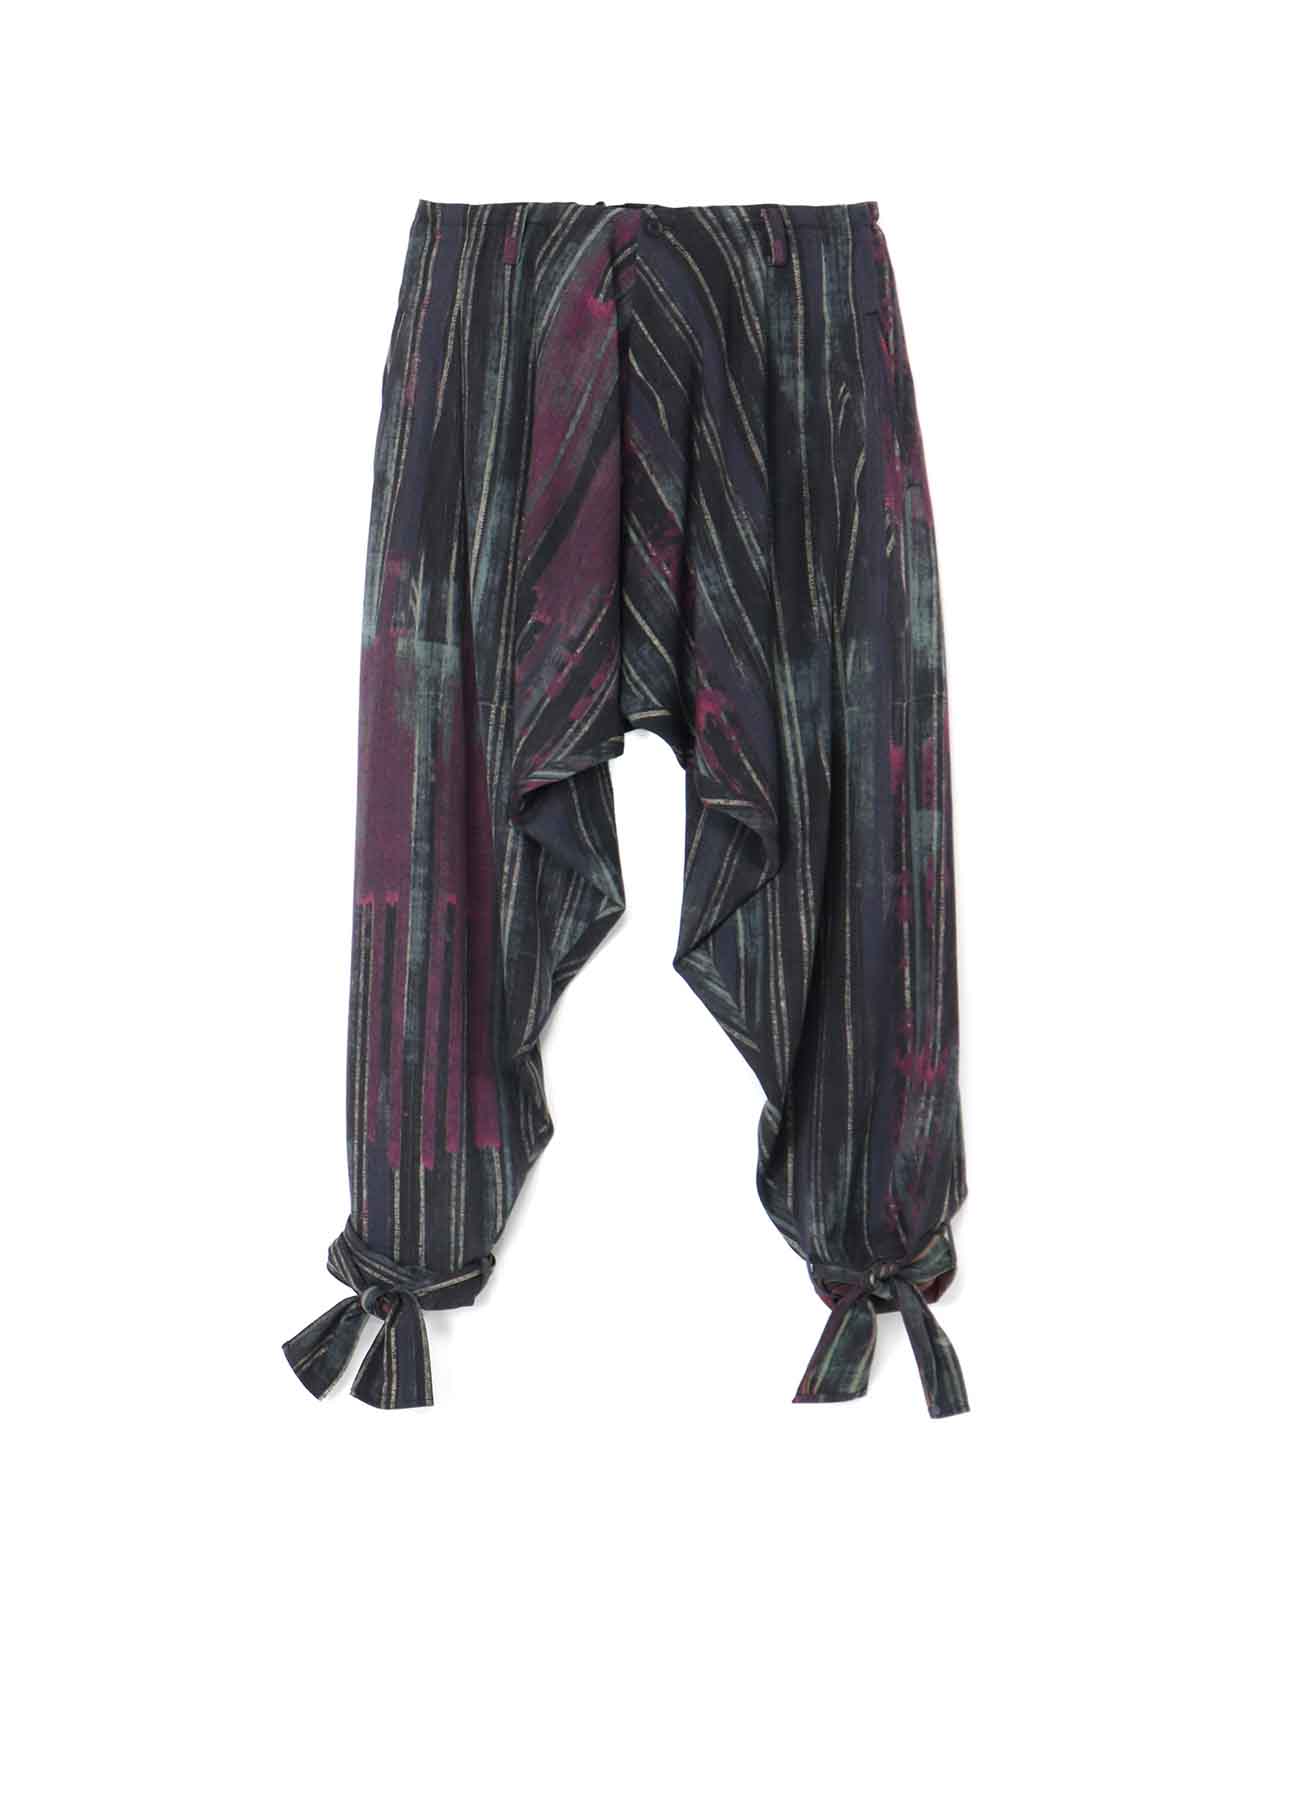 ABSTRACT STRIPE PATTERNED PANTS WITH HEM TIES